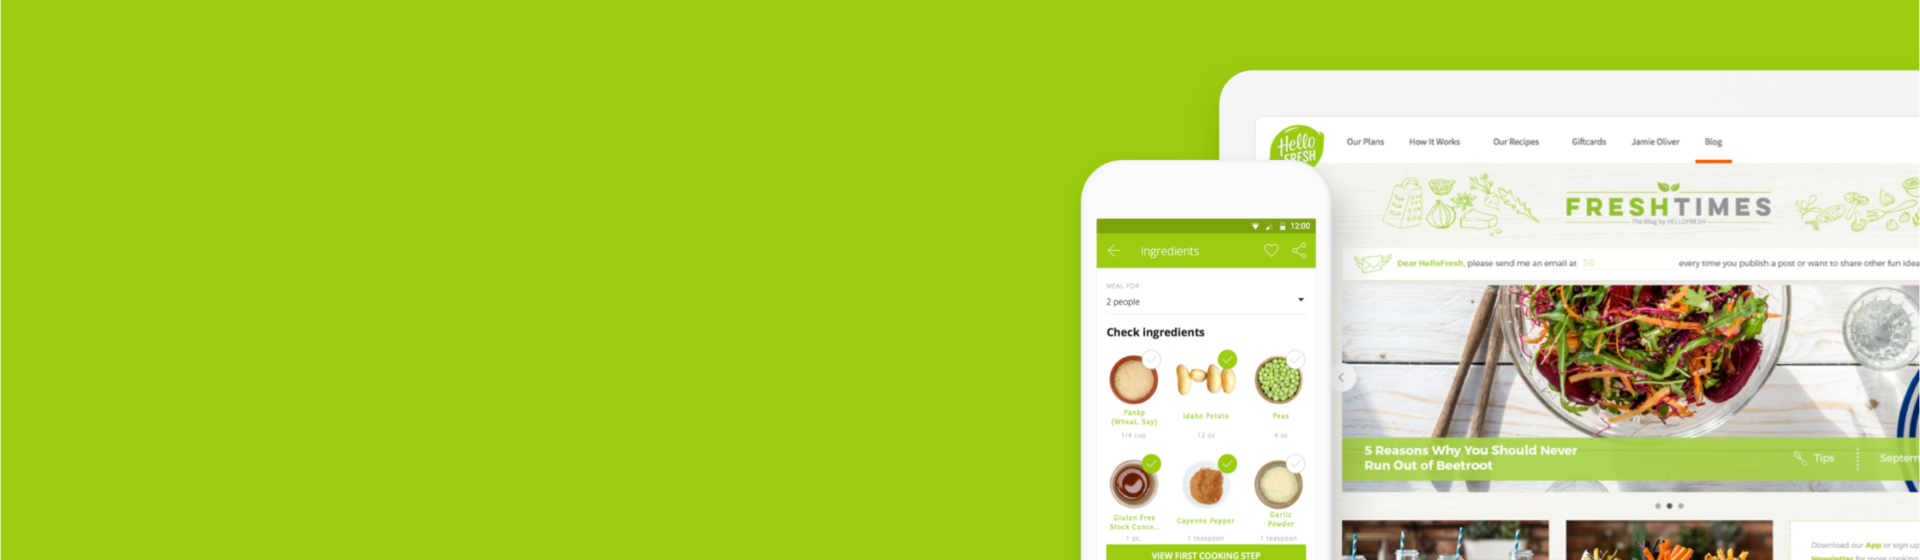 HelloFresh - meal delivery app